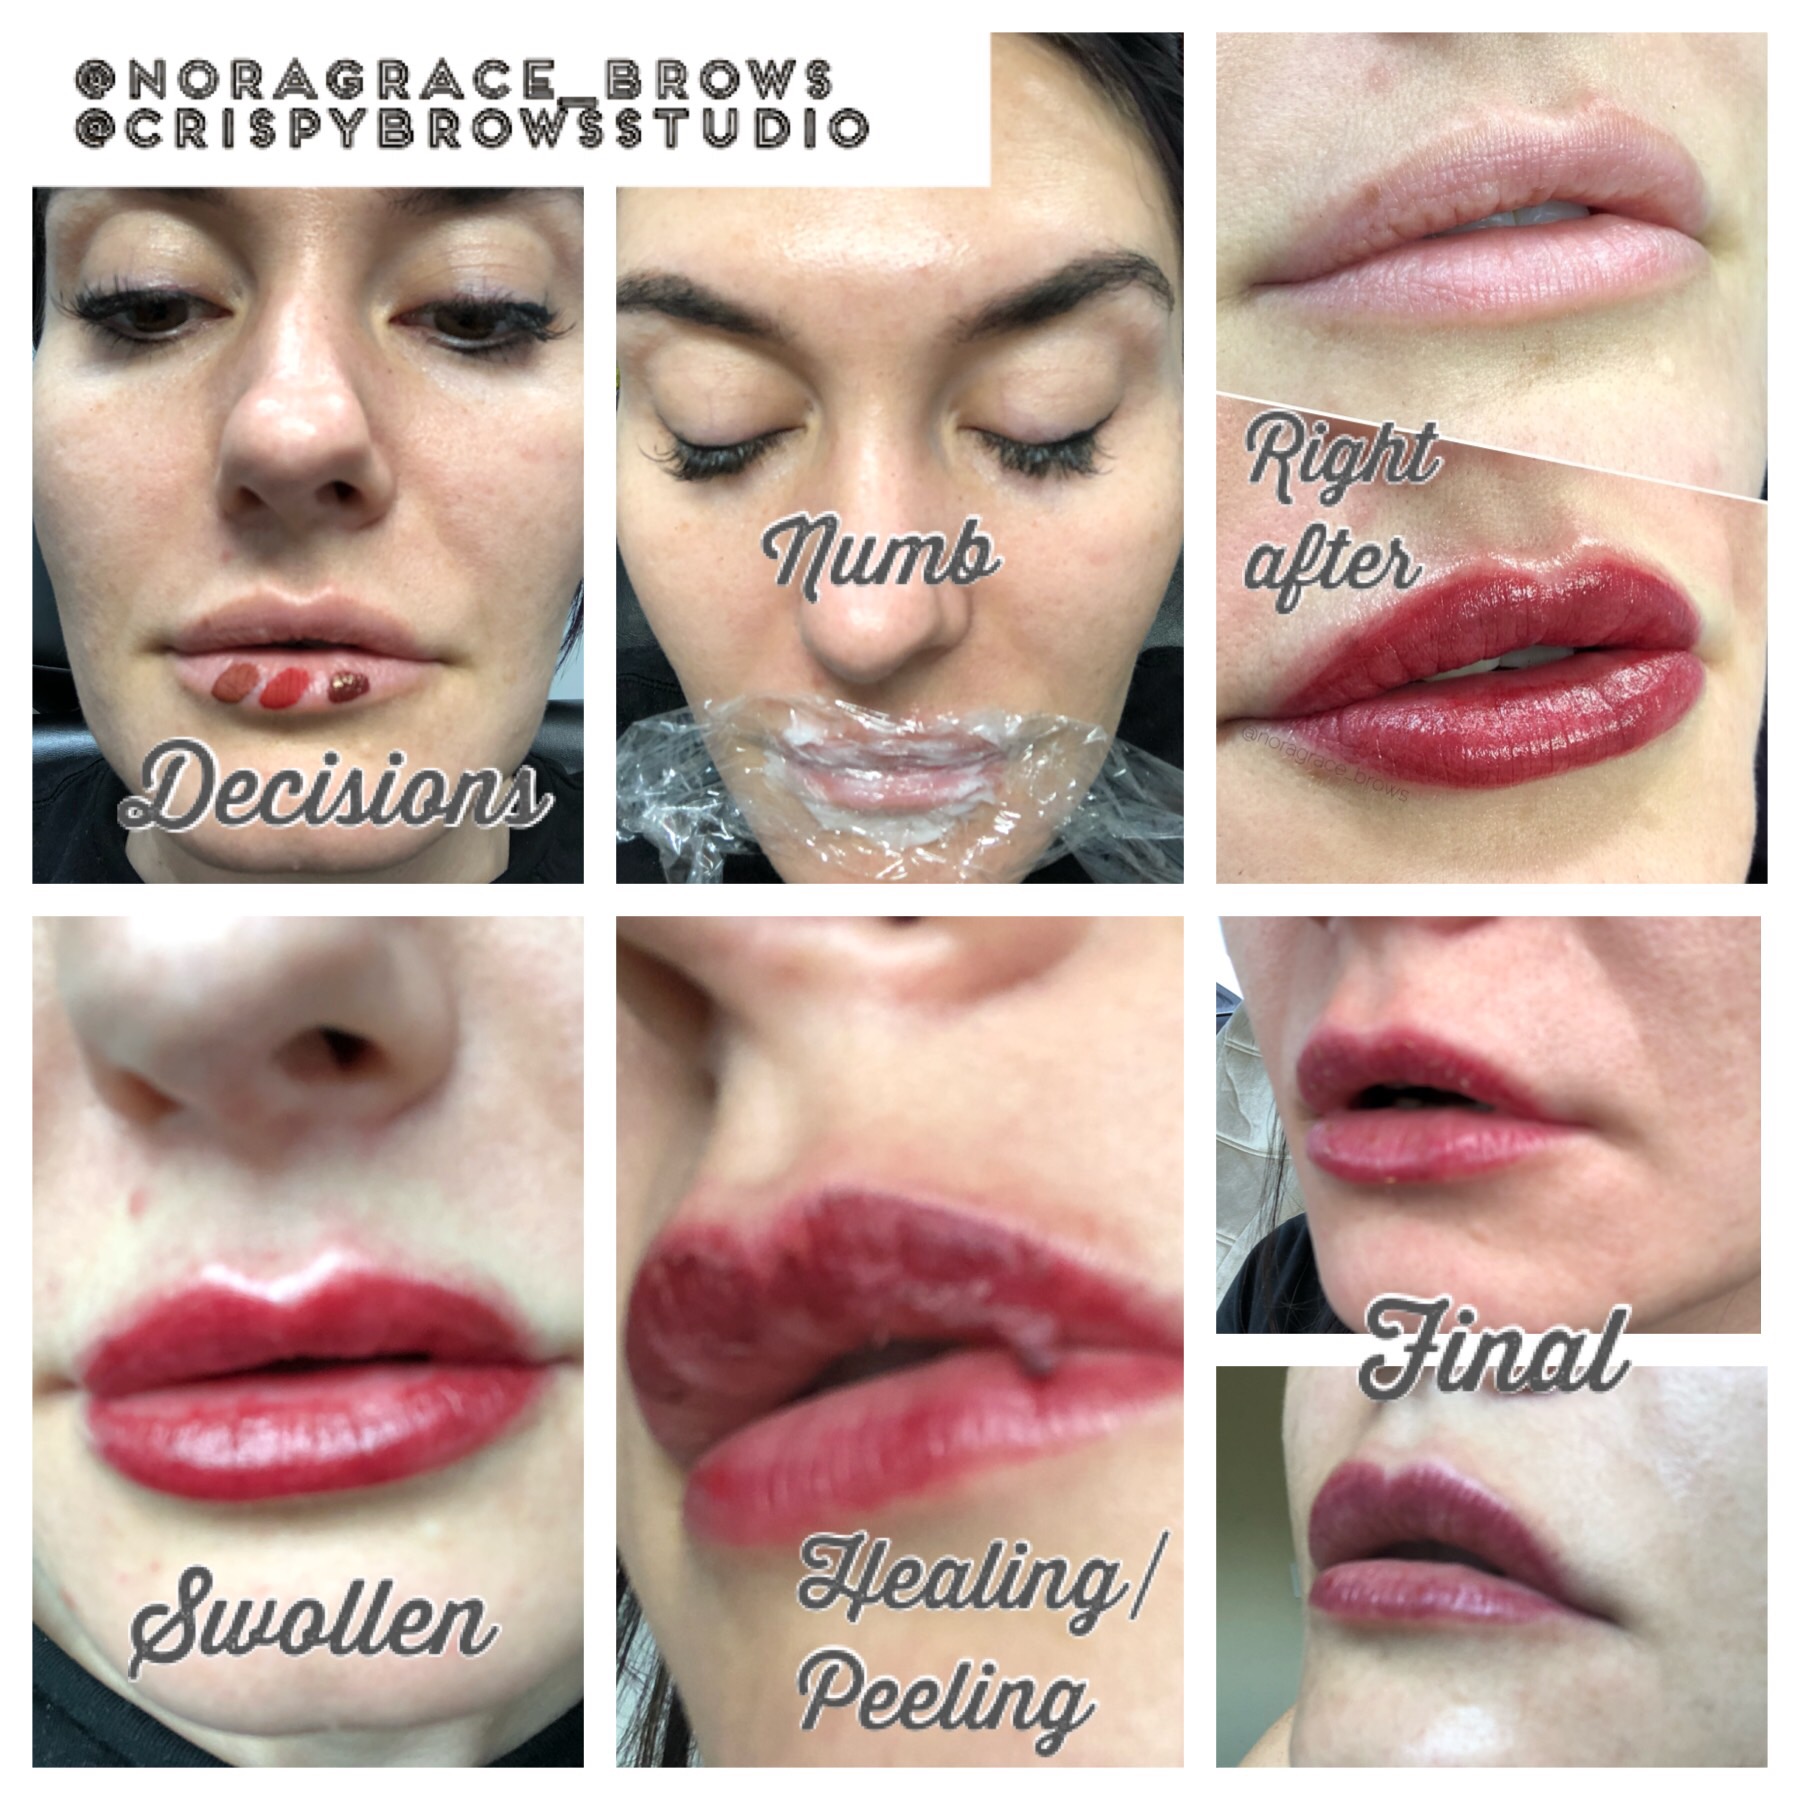 Five Reasons Why You Consider Permanent Makeup Beauty (Tips & Tricks)